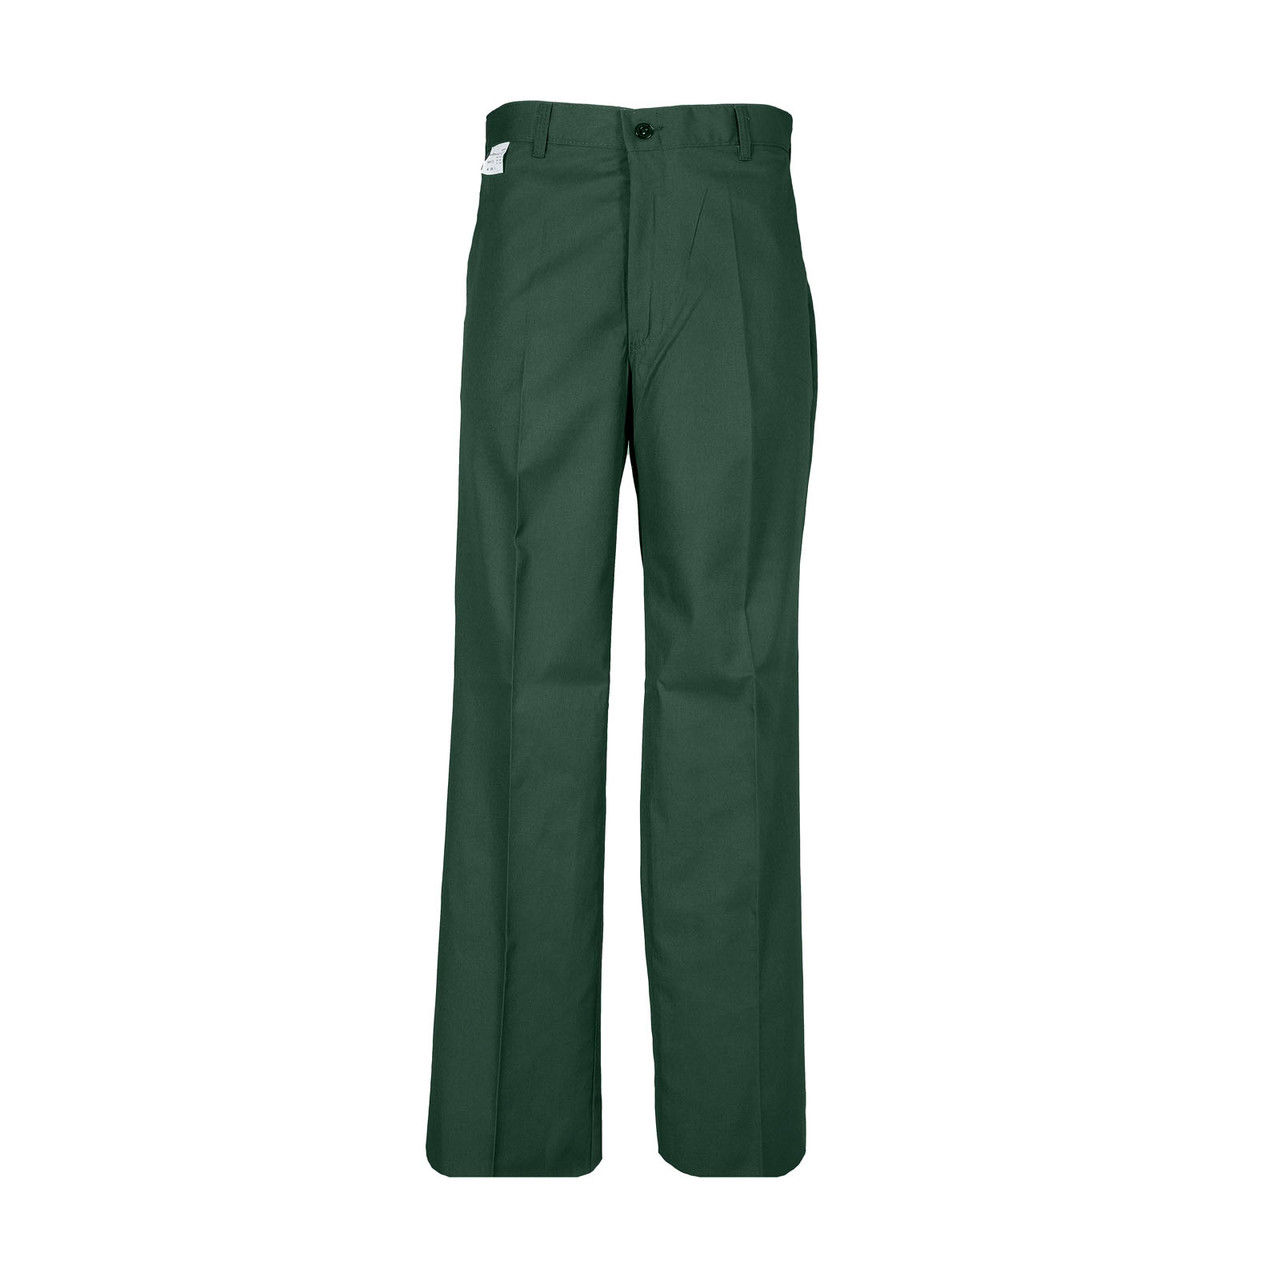 What is the time required to customize hem/inseam length for P20SP green work pants?